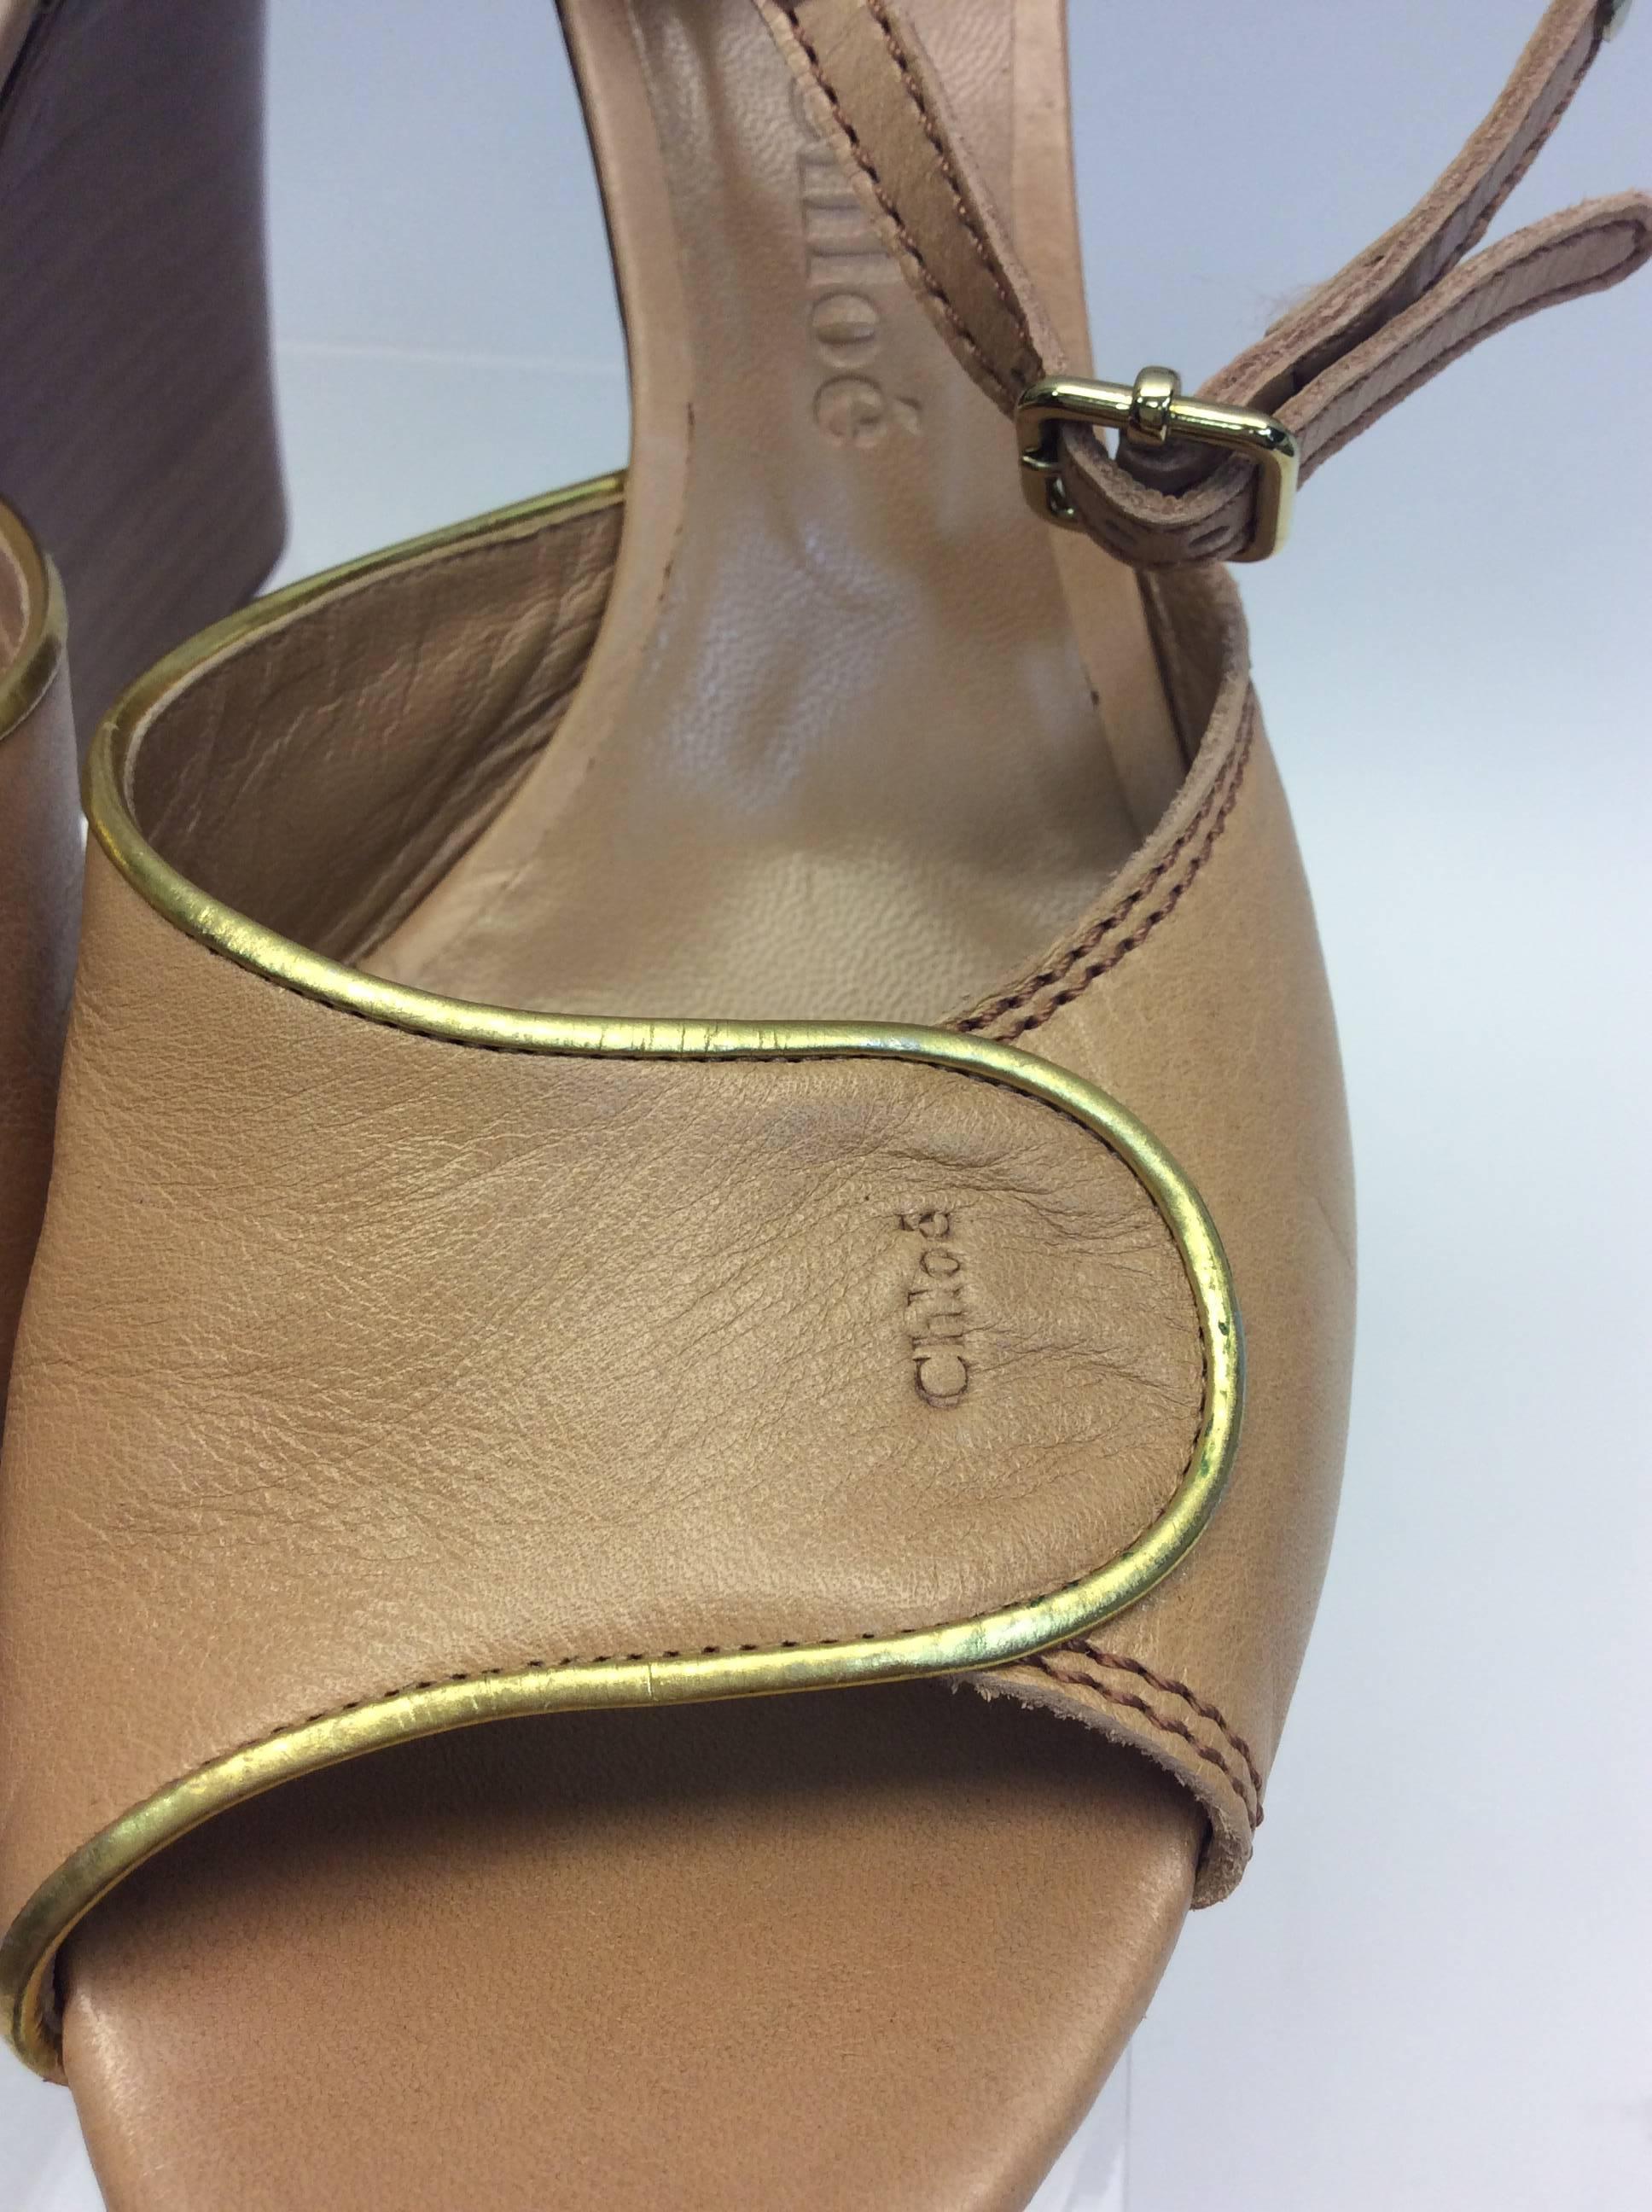 Chloe Tan Leather Wedge For Sale 1